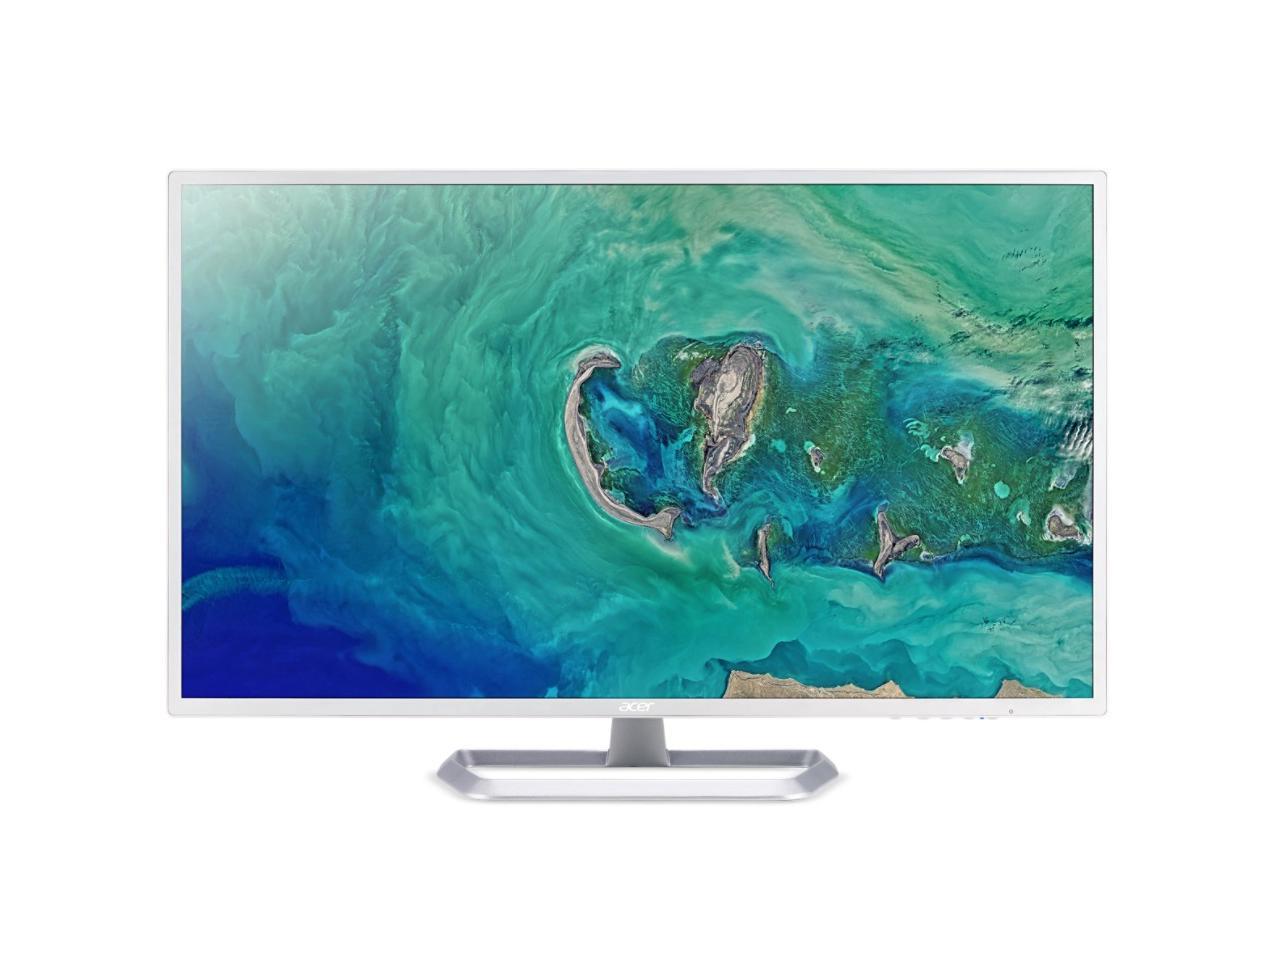 Acer Office Professional EB321HQ Awi 32" IPS 1920x1080 Low Blue Light and Flicker-Less VESA wall Mounting Monitor, VGA, HDMI - image 1 of 6